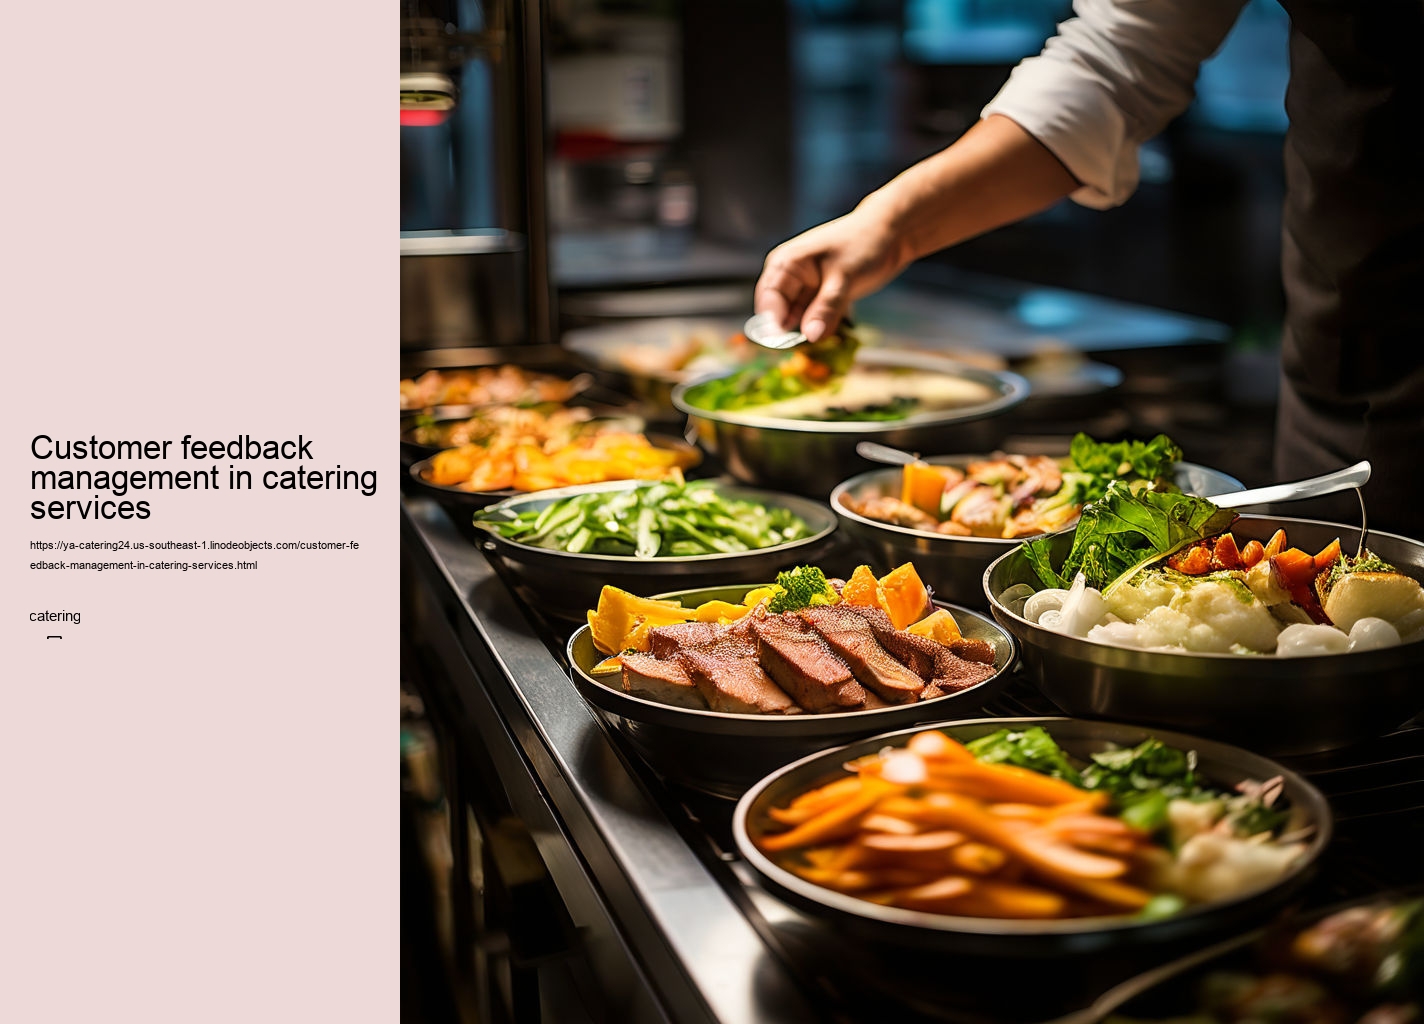 Customer feedback management in catering services